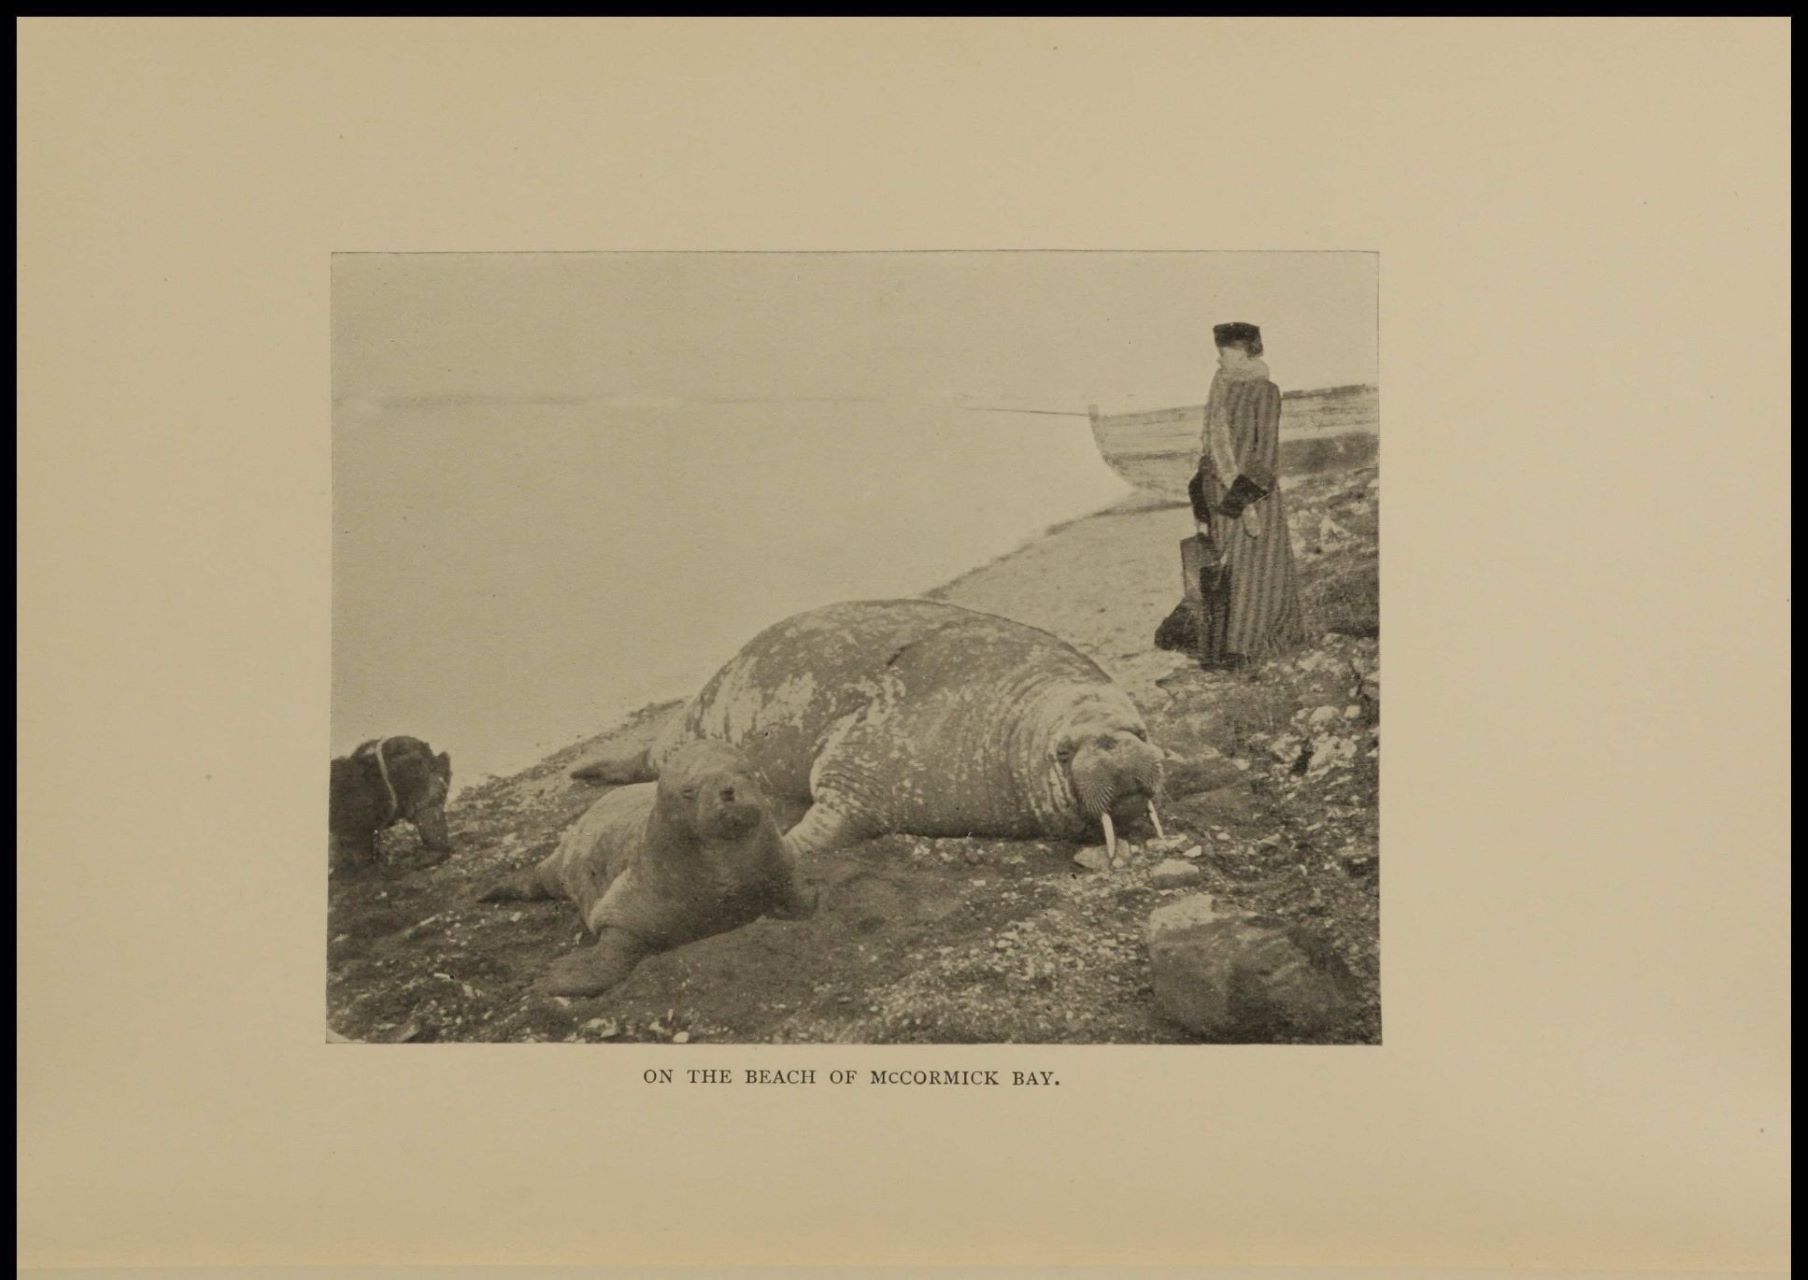 Peary, Josephine Diebitsch, and Robert Edwin Peary. My Arctic journal: a year among ice-fields and Eskimos: by Josephine Diebitsch-Peary; with an account of the great white journey across Greenland, by Robert E. Peary. The Contemporary Publishing Company, 1893. Women's Studies Archive, https://link.gale.com/apps/doc/QMTVHH323807754/WMNS?u=webdemo&sid=WMNS&xid=ca76ca1e&pg=4